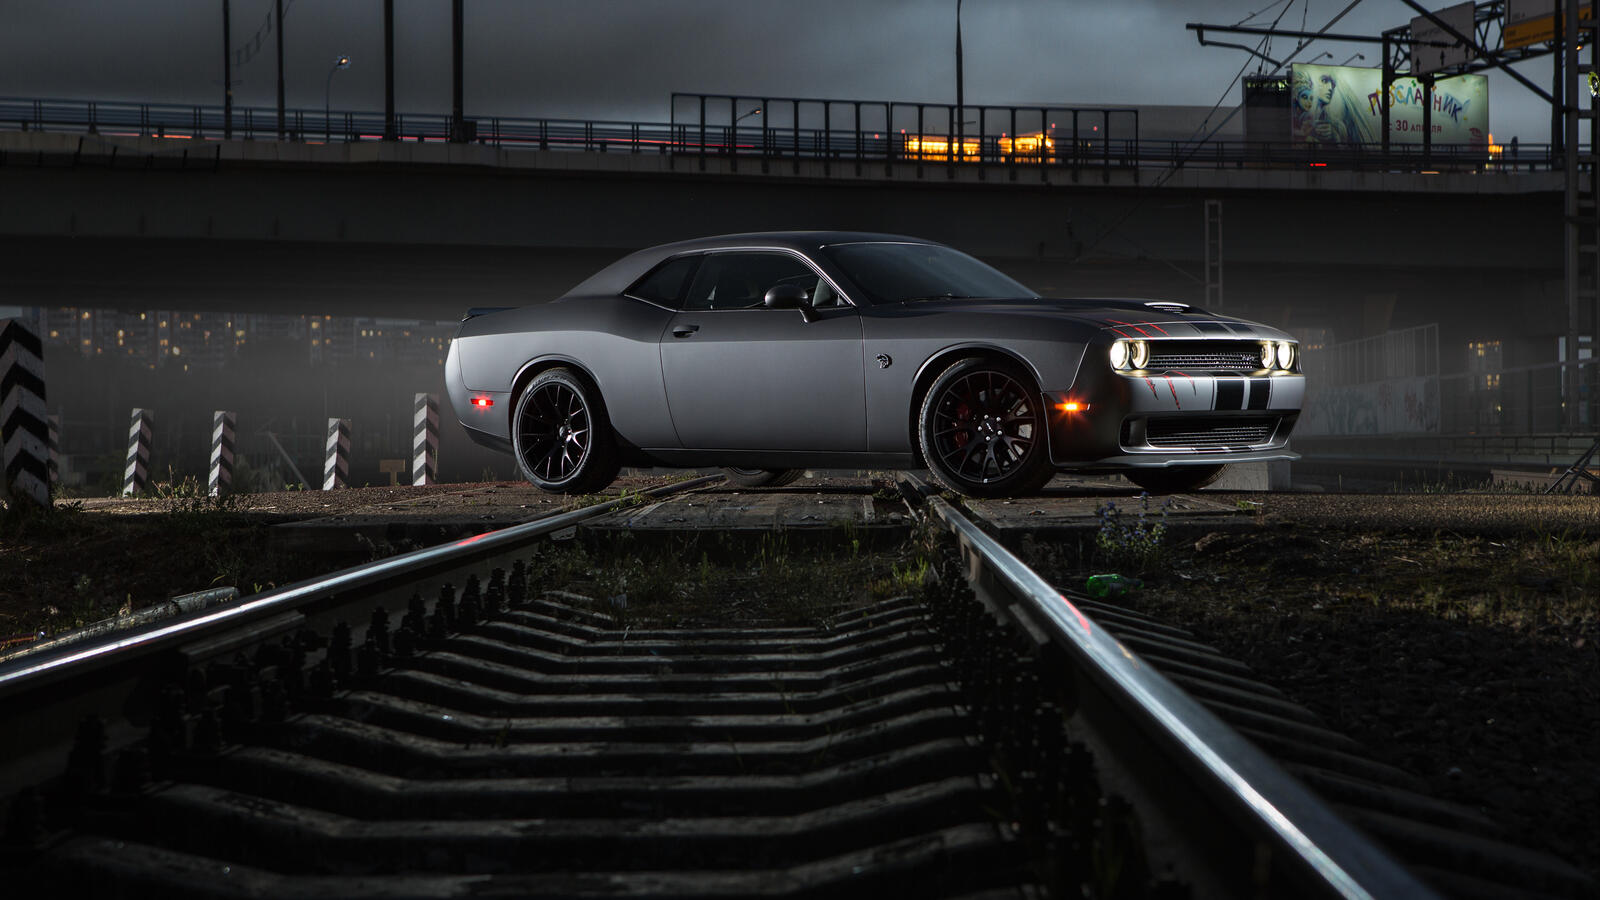 Free photo Dodge Challenger is parked on the railroad tracks